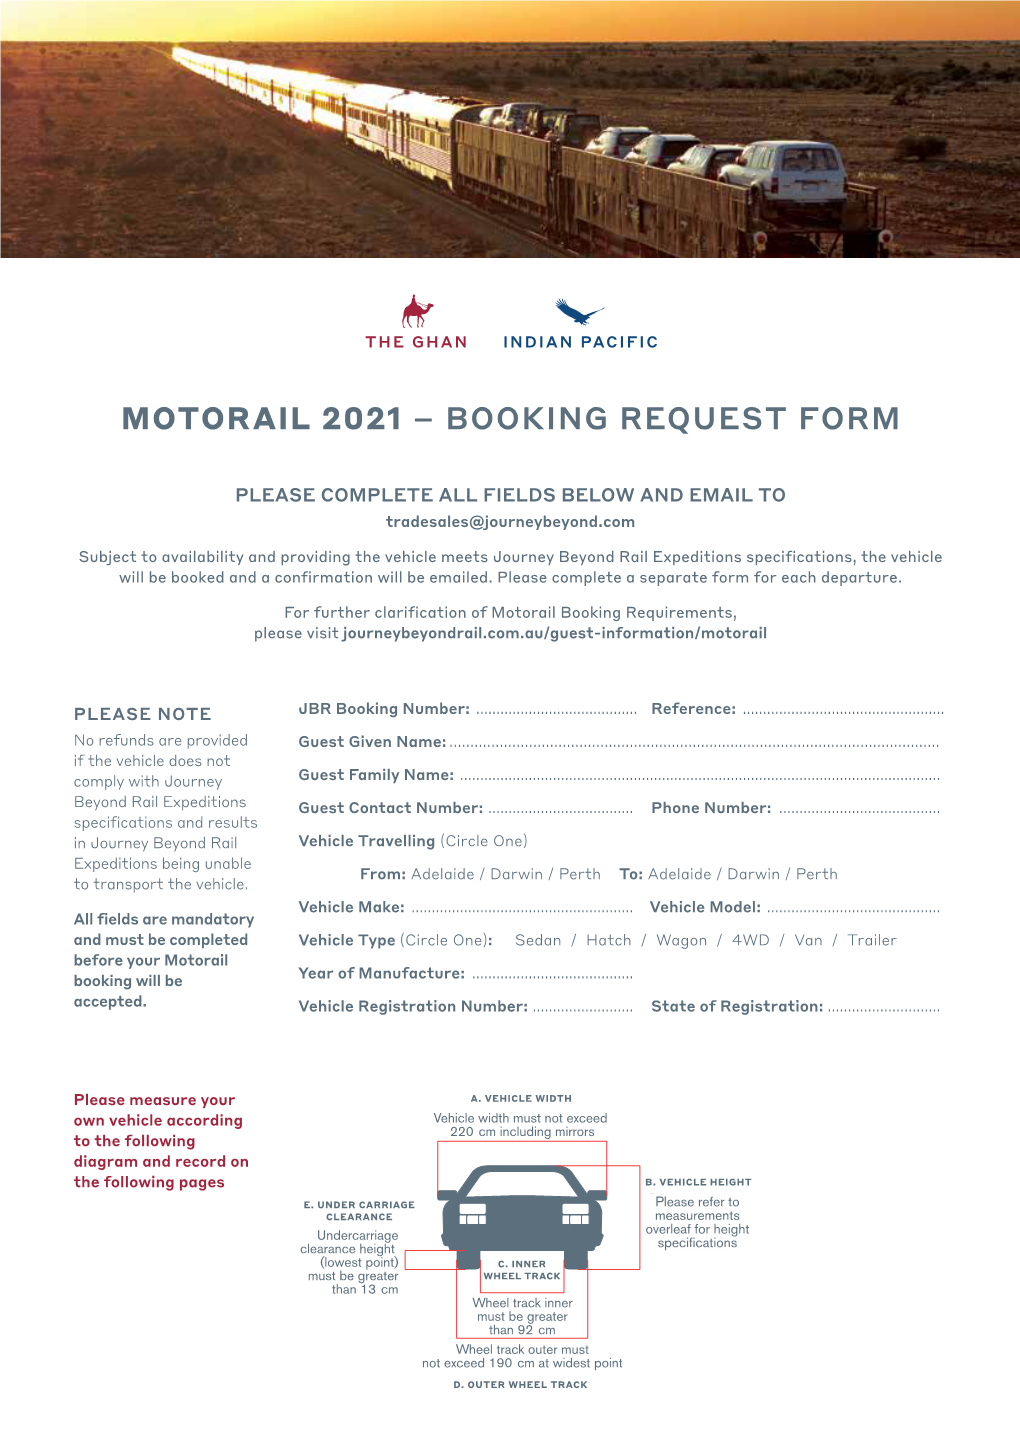 Motorail 2021 – Booking Request Form